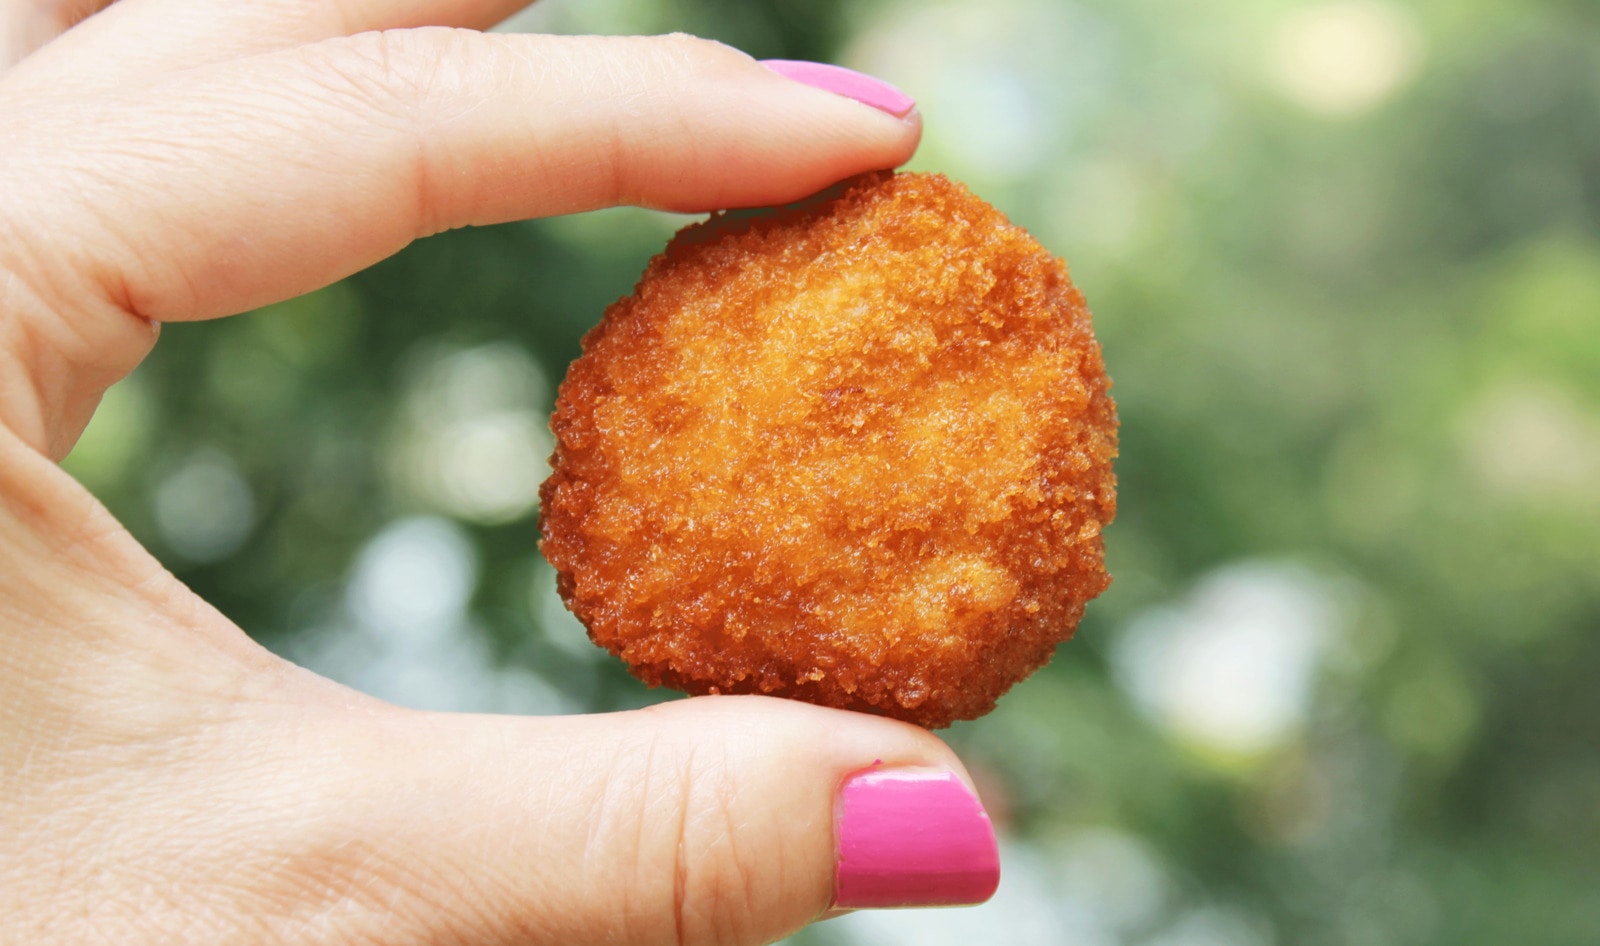 Vegan Chicken Nugget Startup Raises $6 Million to Build “Pandemic-Proof” Food System